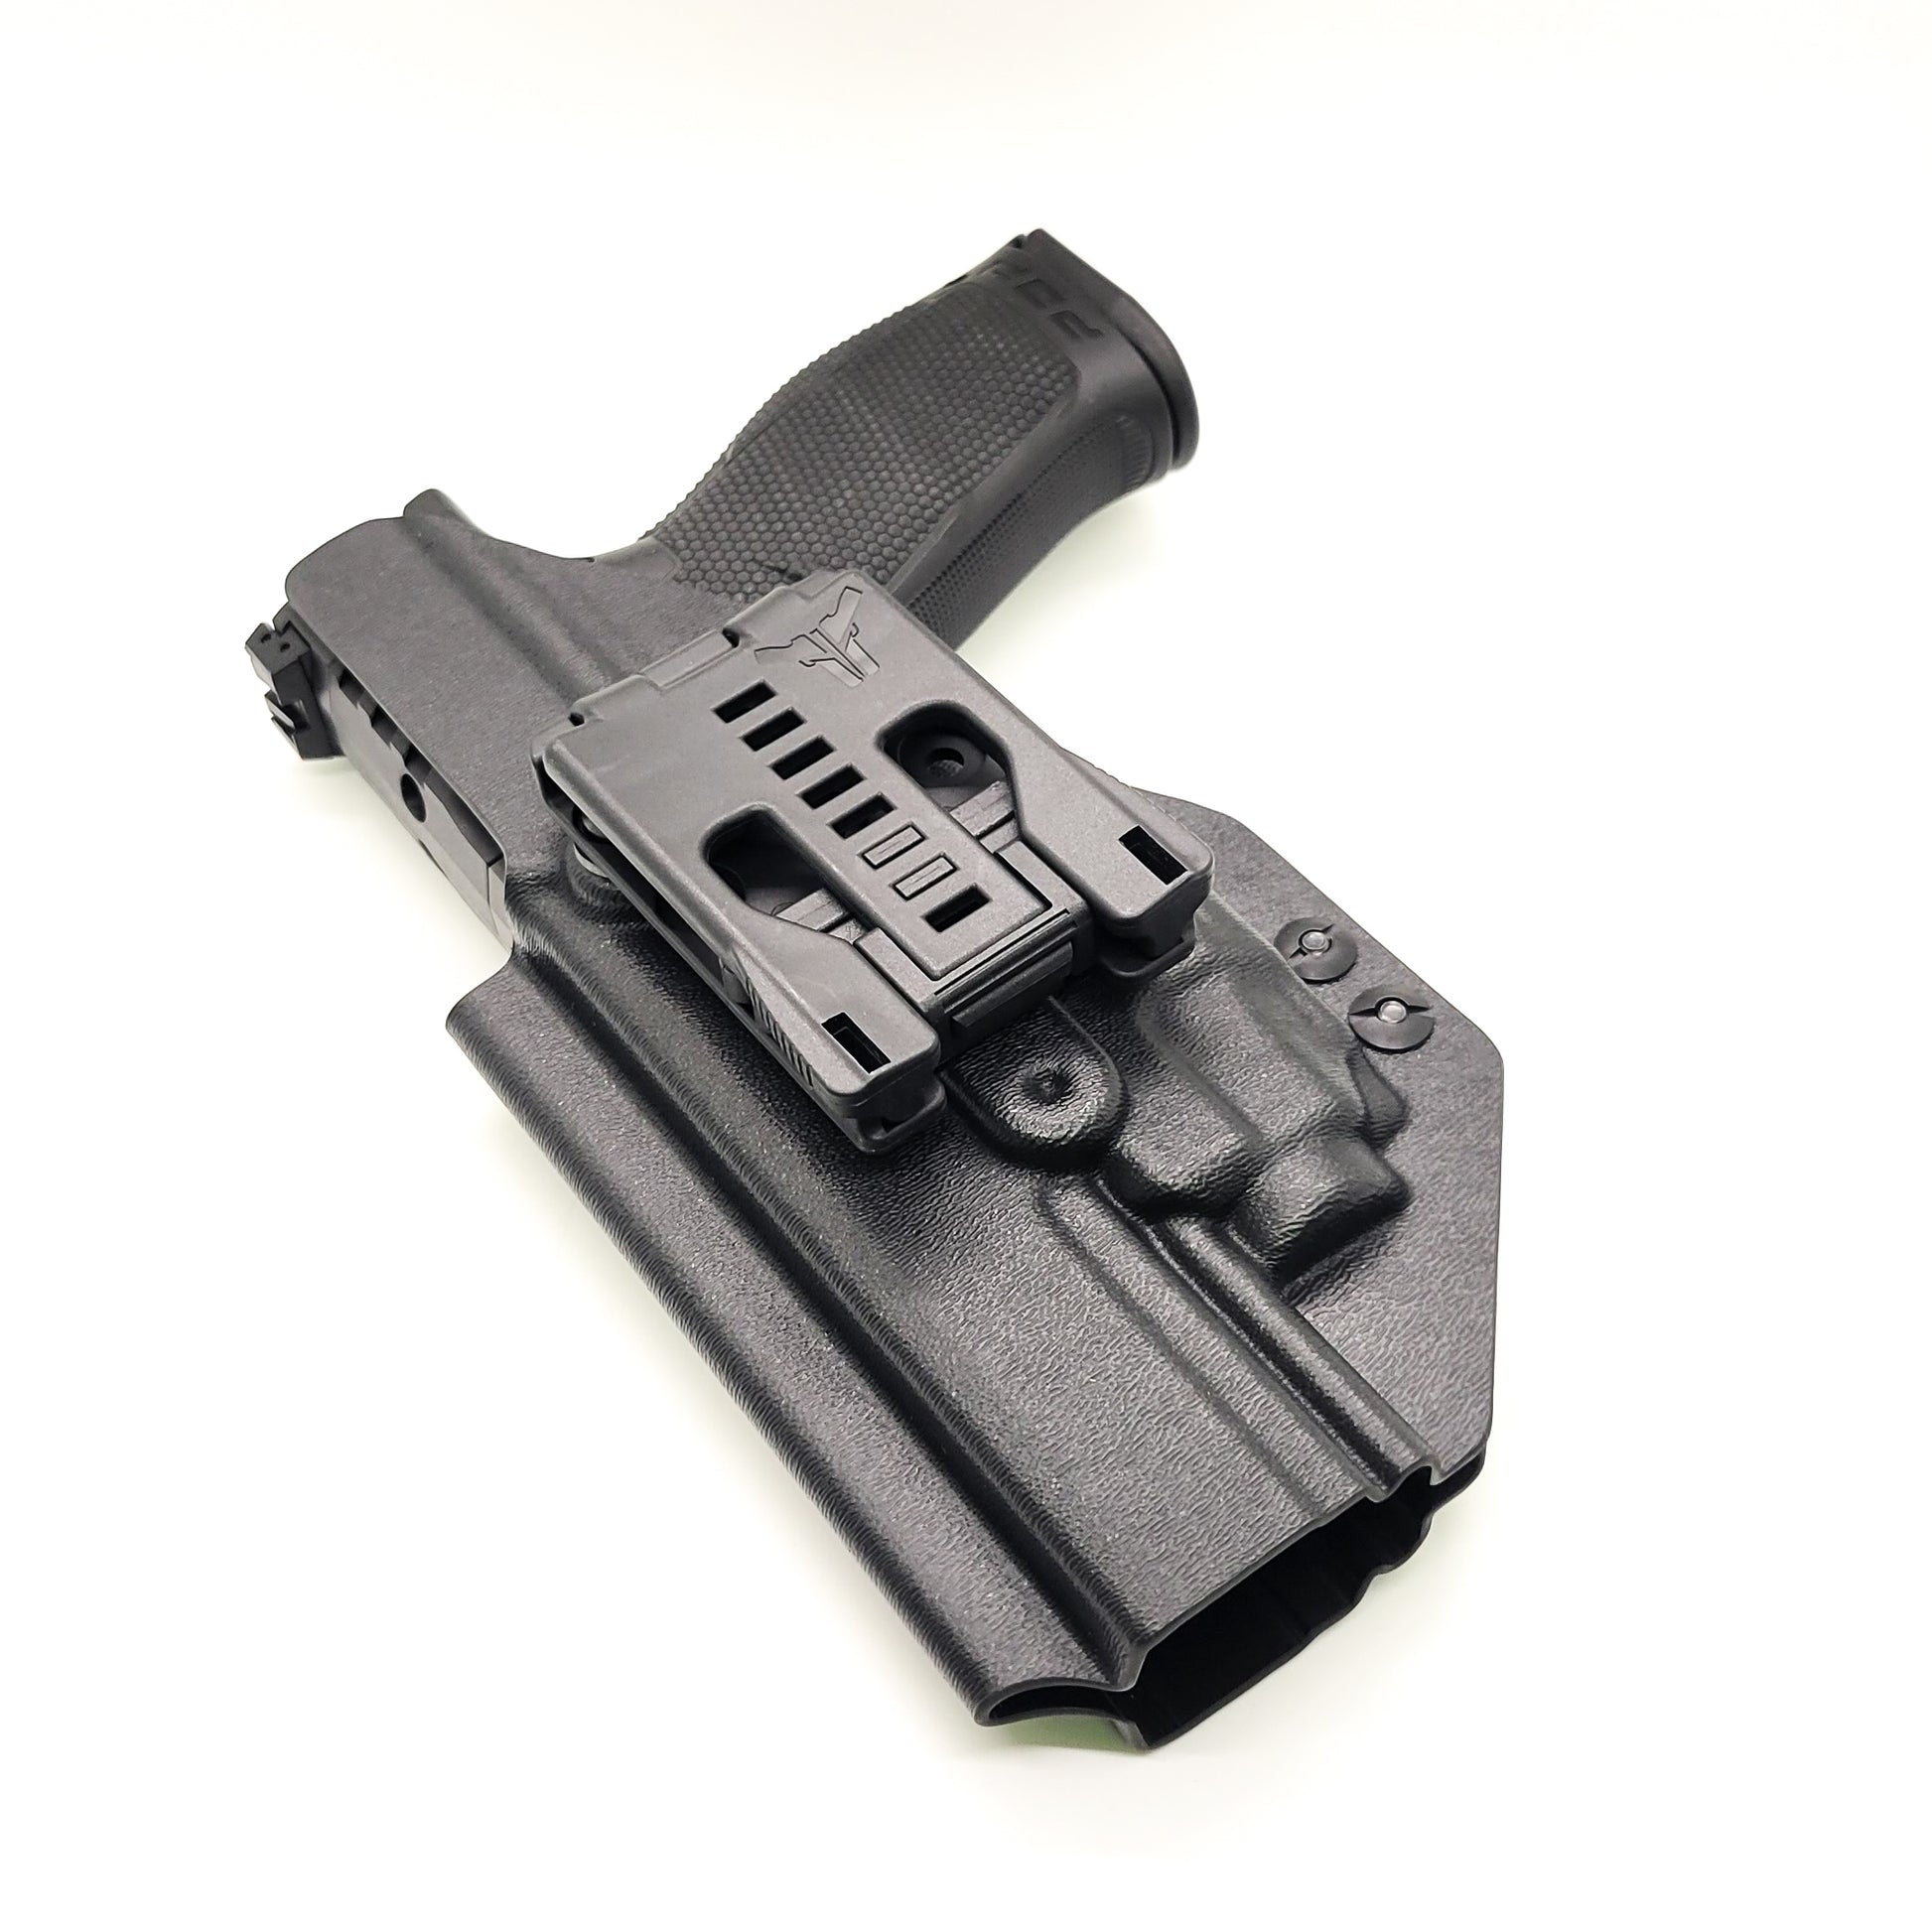 For the best Outside Waistband Taco Style Holster designed to fit the Walther PDP 5" Full-Size pistol with the Streamlight TLR-8 mounted on the firearm, shop Four Brothers Holsters. Cut for red dot sight, full sweat guard, adjustable retention & open muzzle for threaded barrels & compensators.